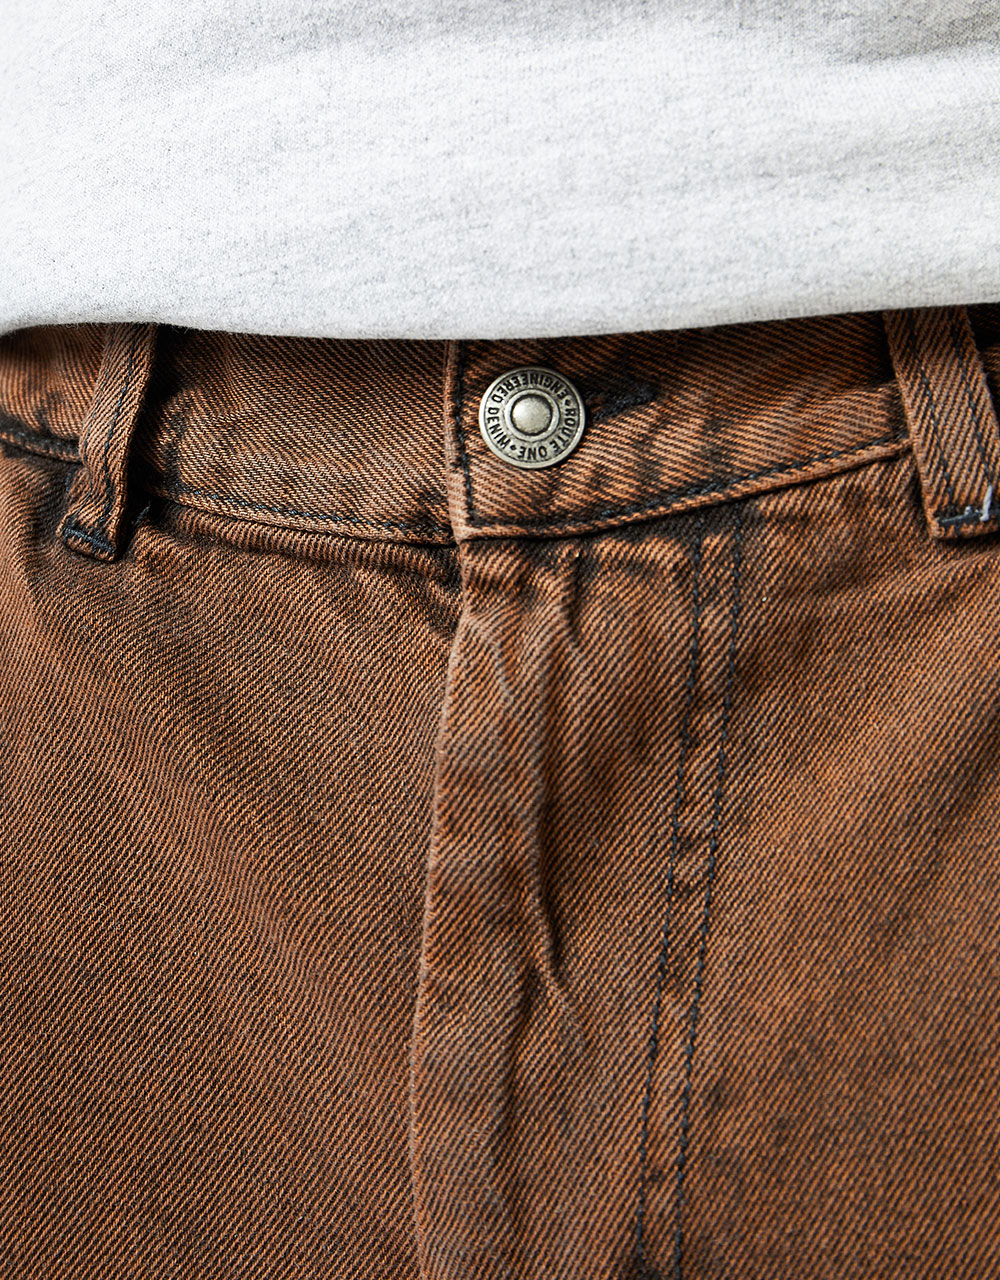 Route One Super Baggy Denim Jeans - Gingerbread